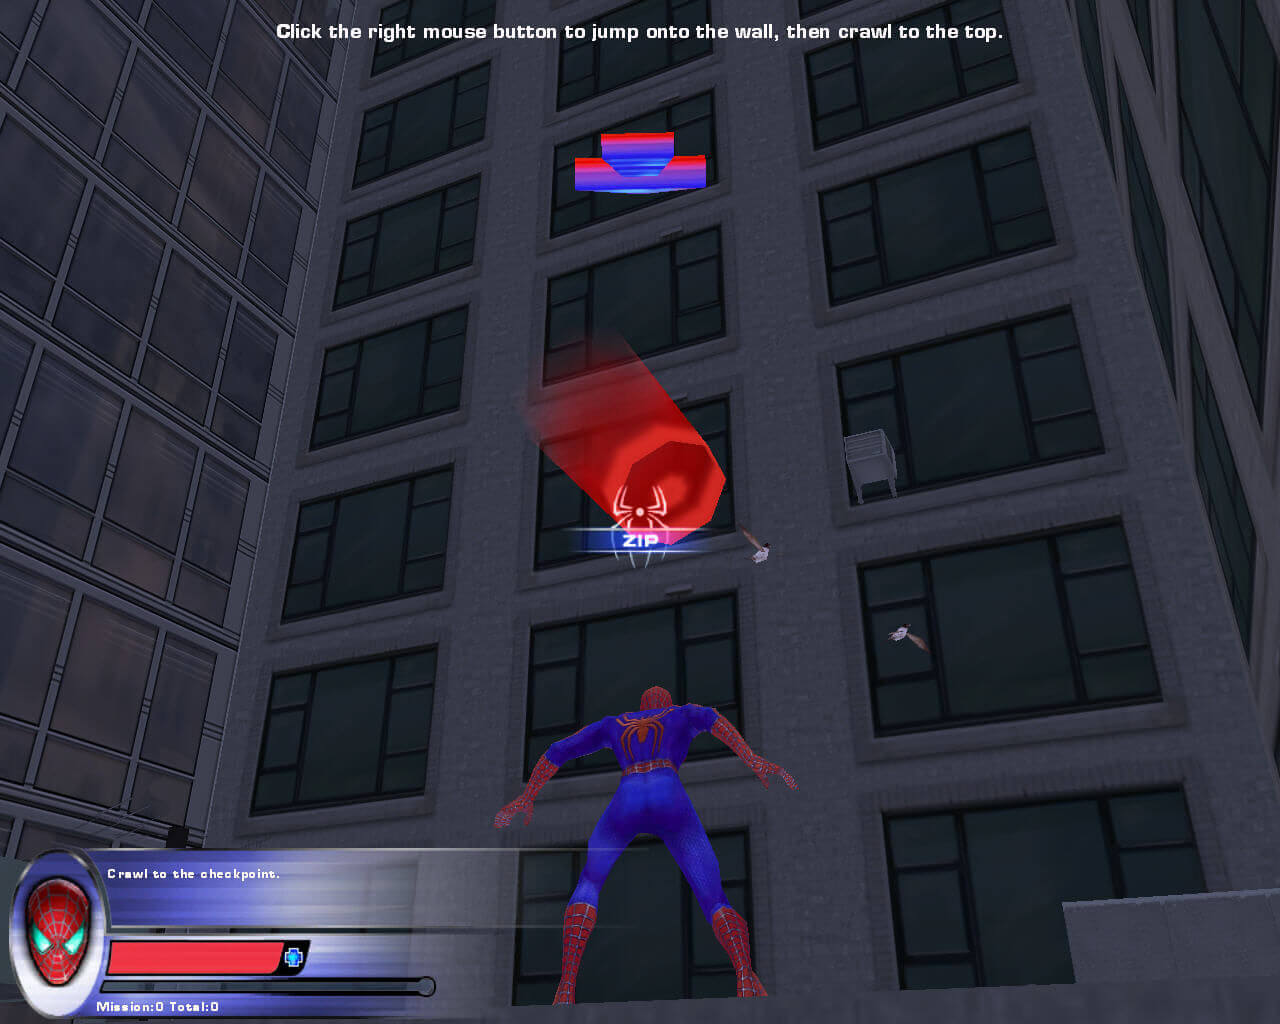 Spider-Man 2: The Game System Requirements